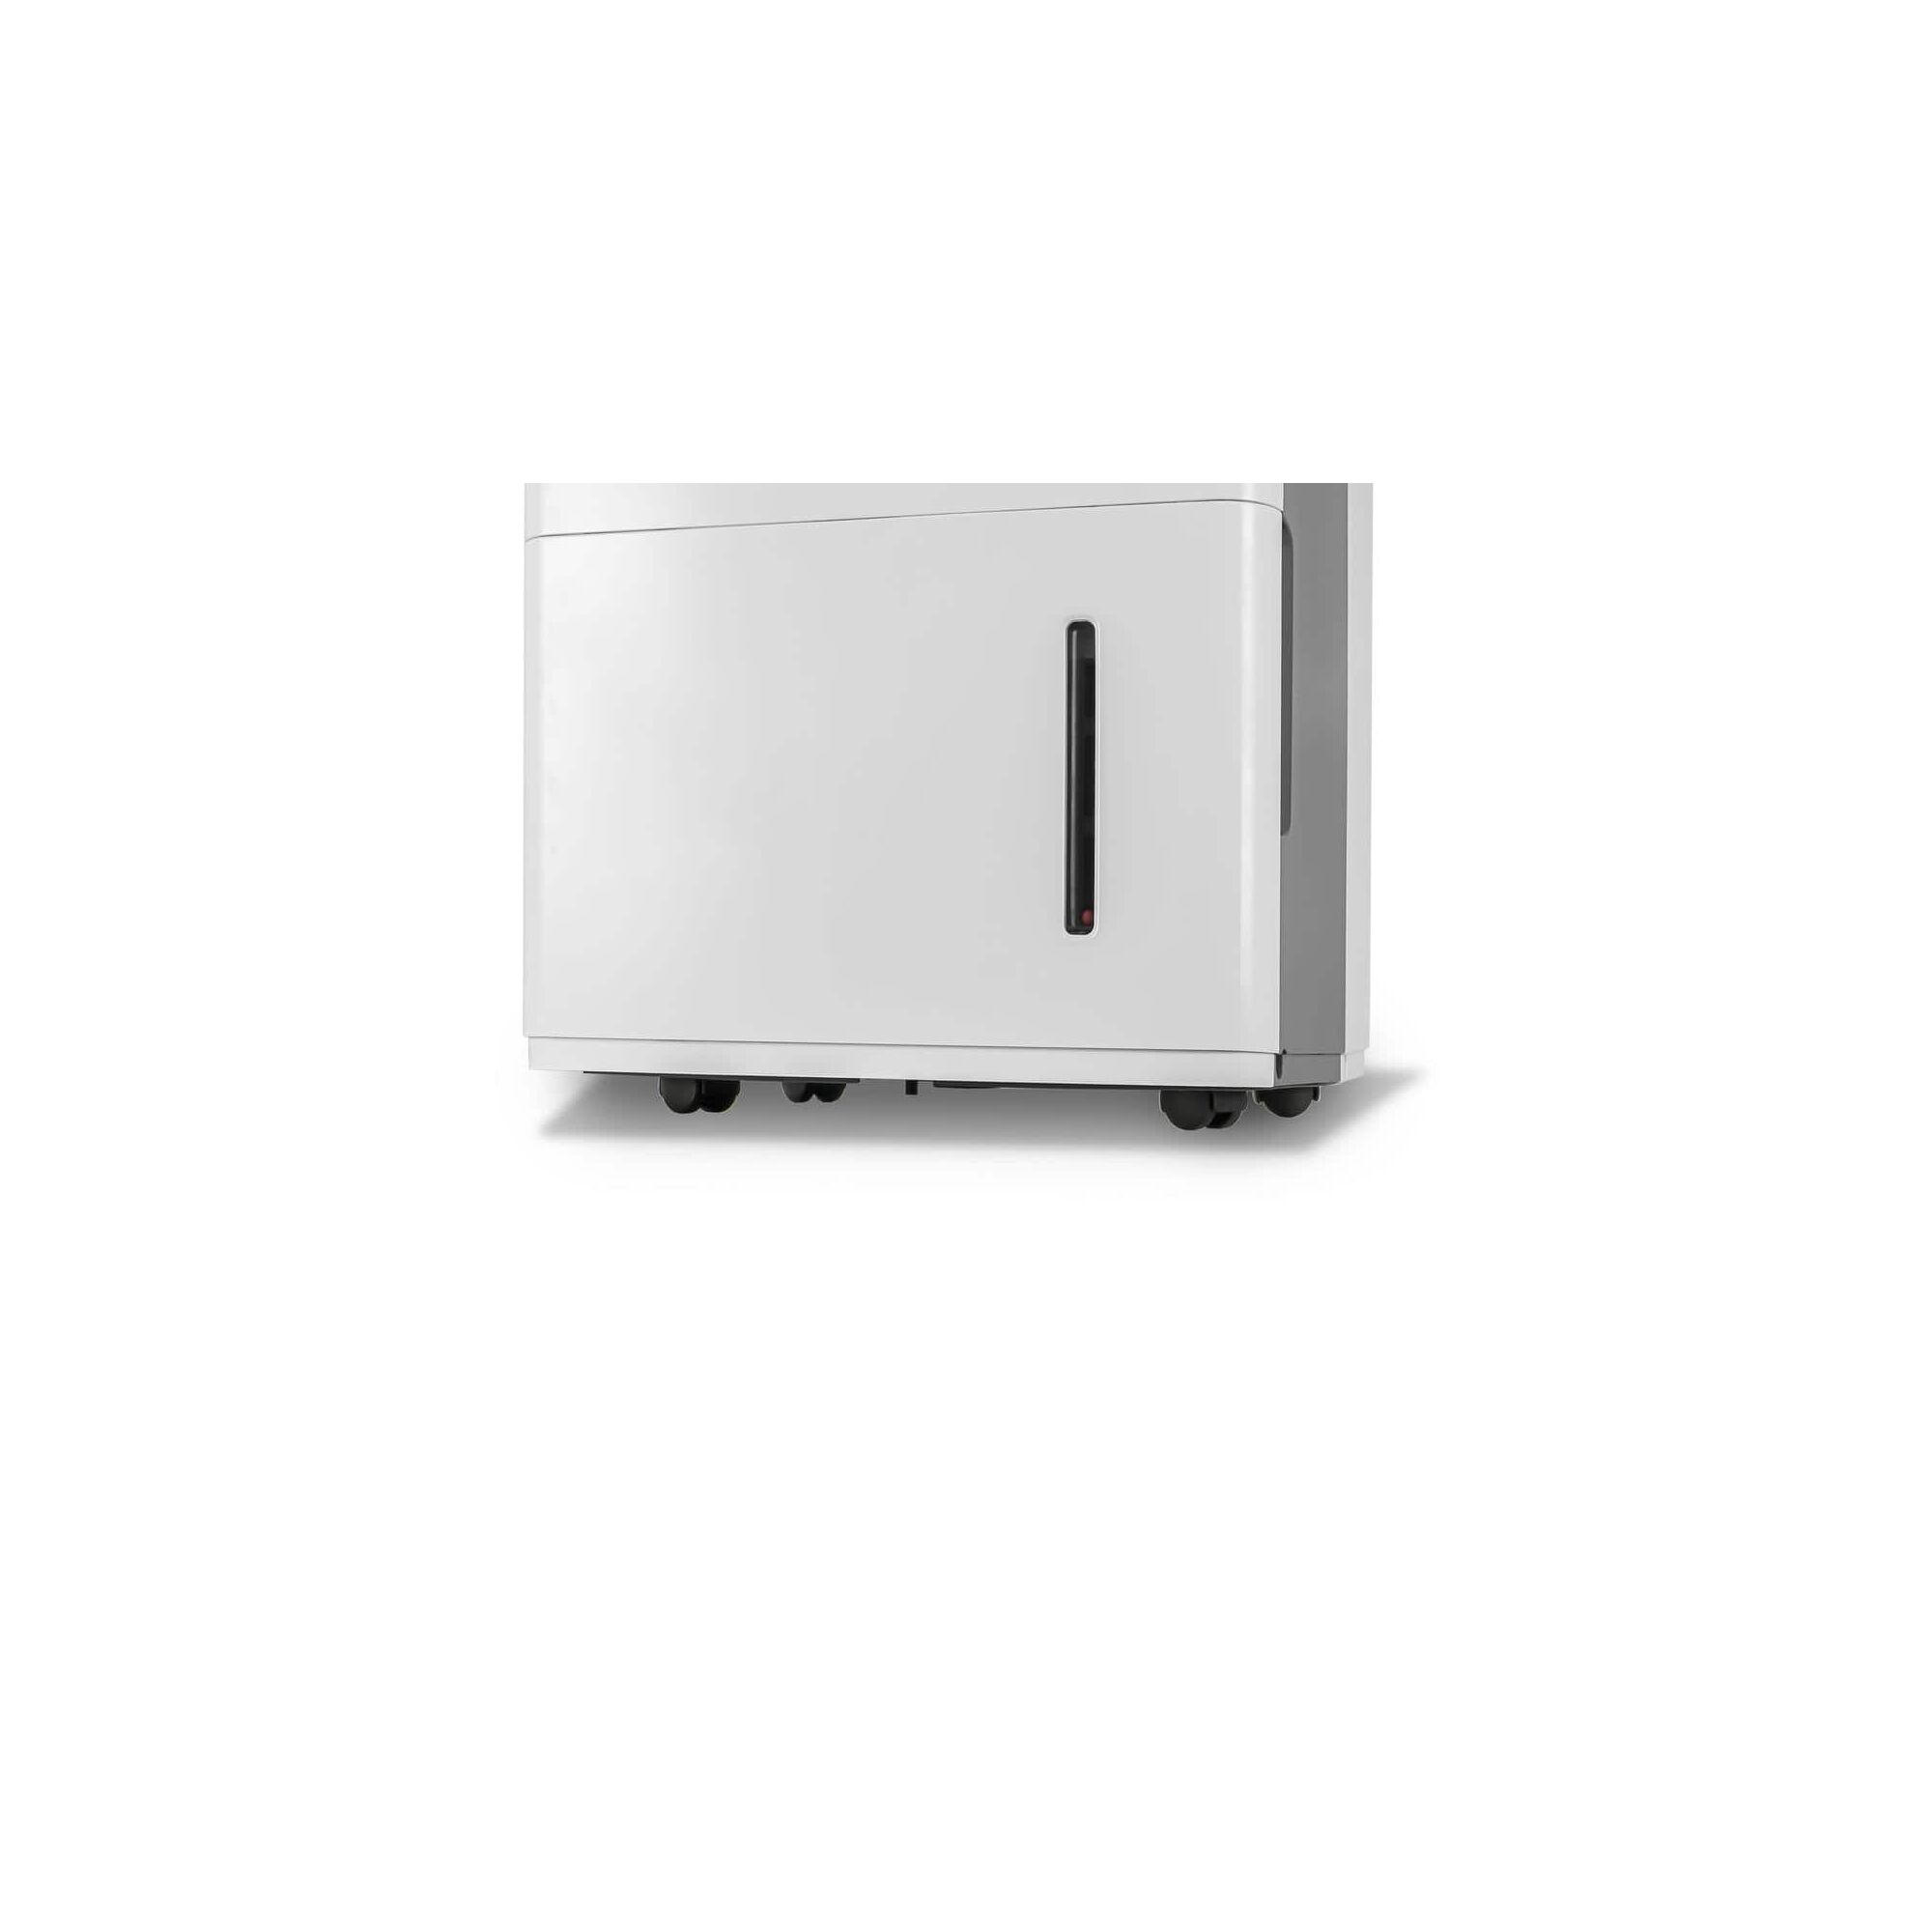 Close-up of the base of the Portable Dehumidifier on a  white background.